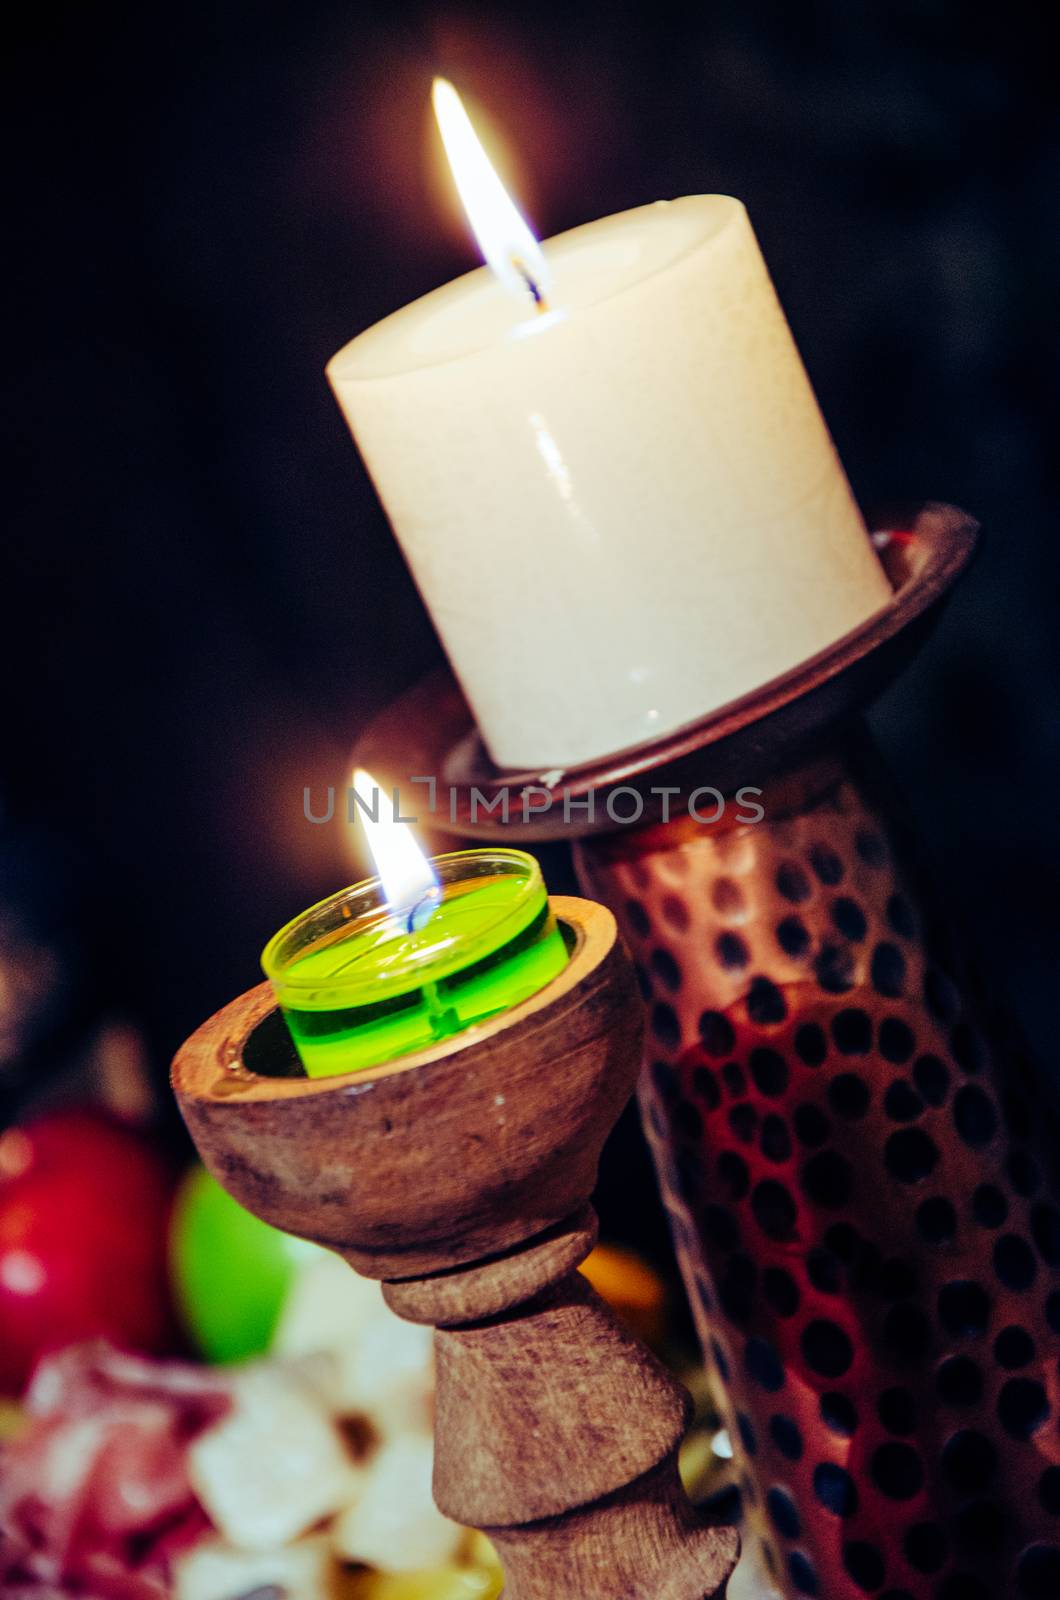 Candles by Peruphotoart